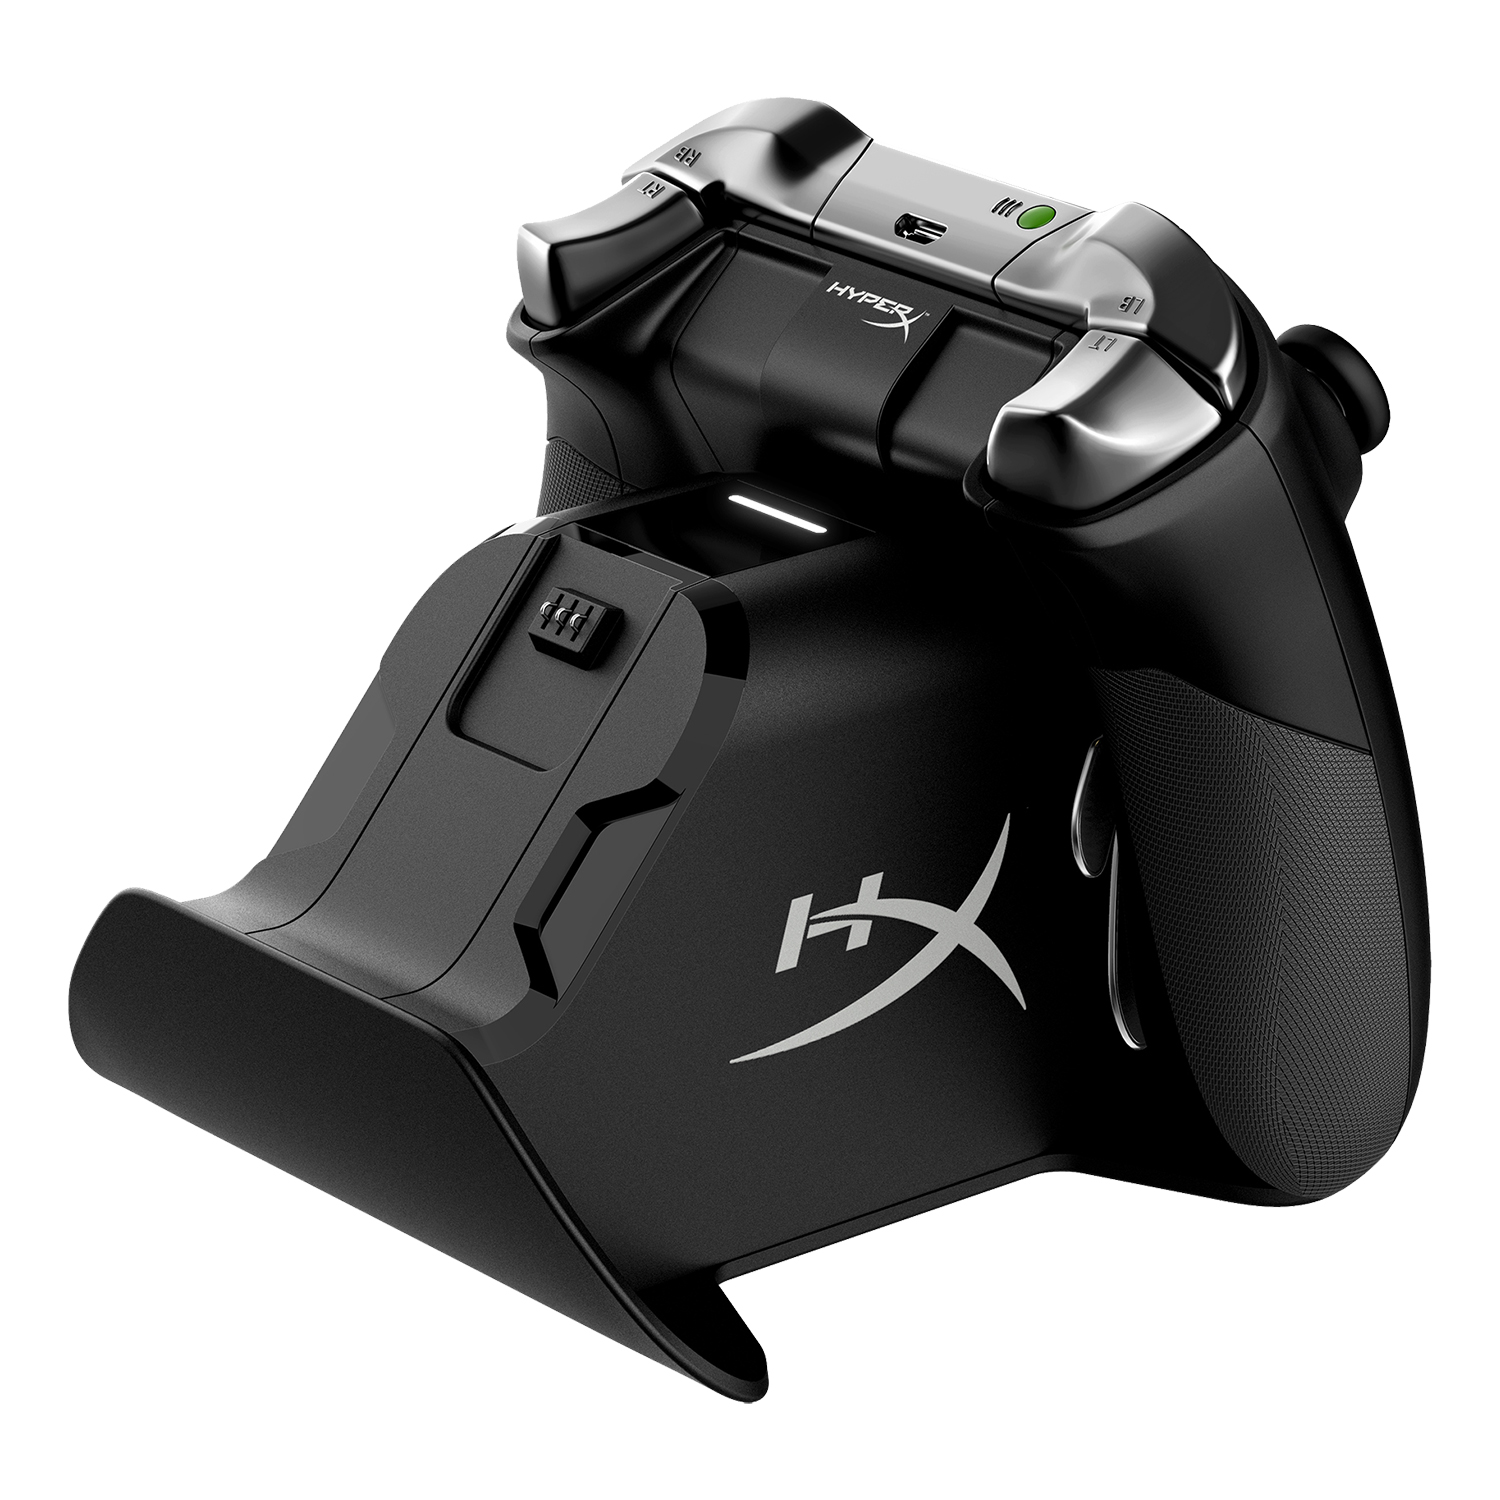 HyperX ChargePlay Duo for Xbox One